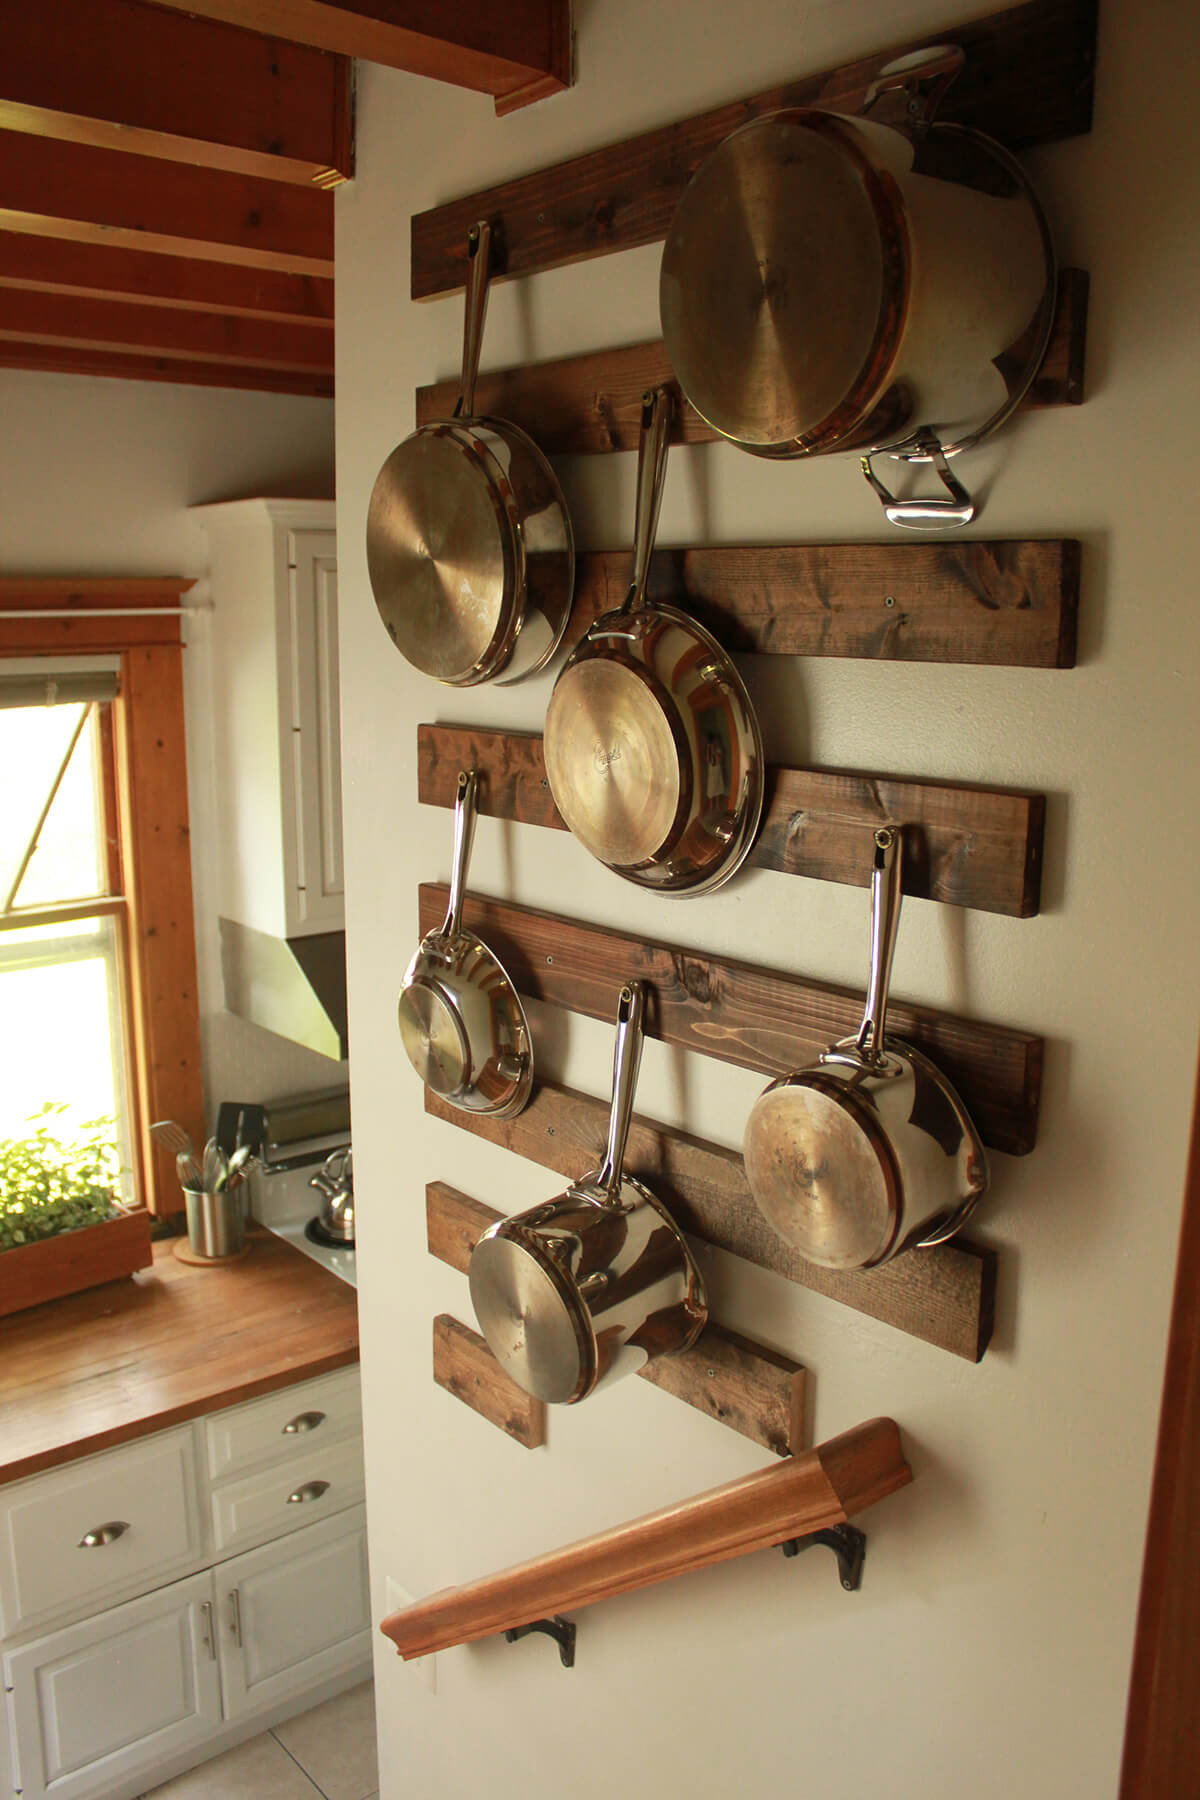 Wooden Kitchen Wall Art
 36 Best Kitchen Wall Decor Ideas and Designs for 2020